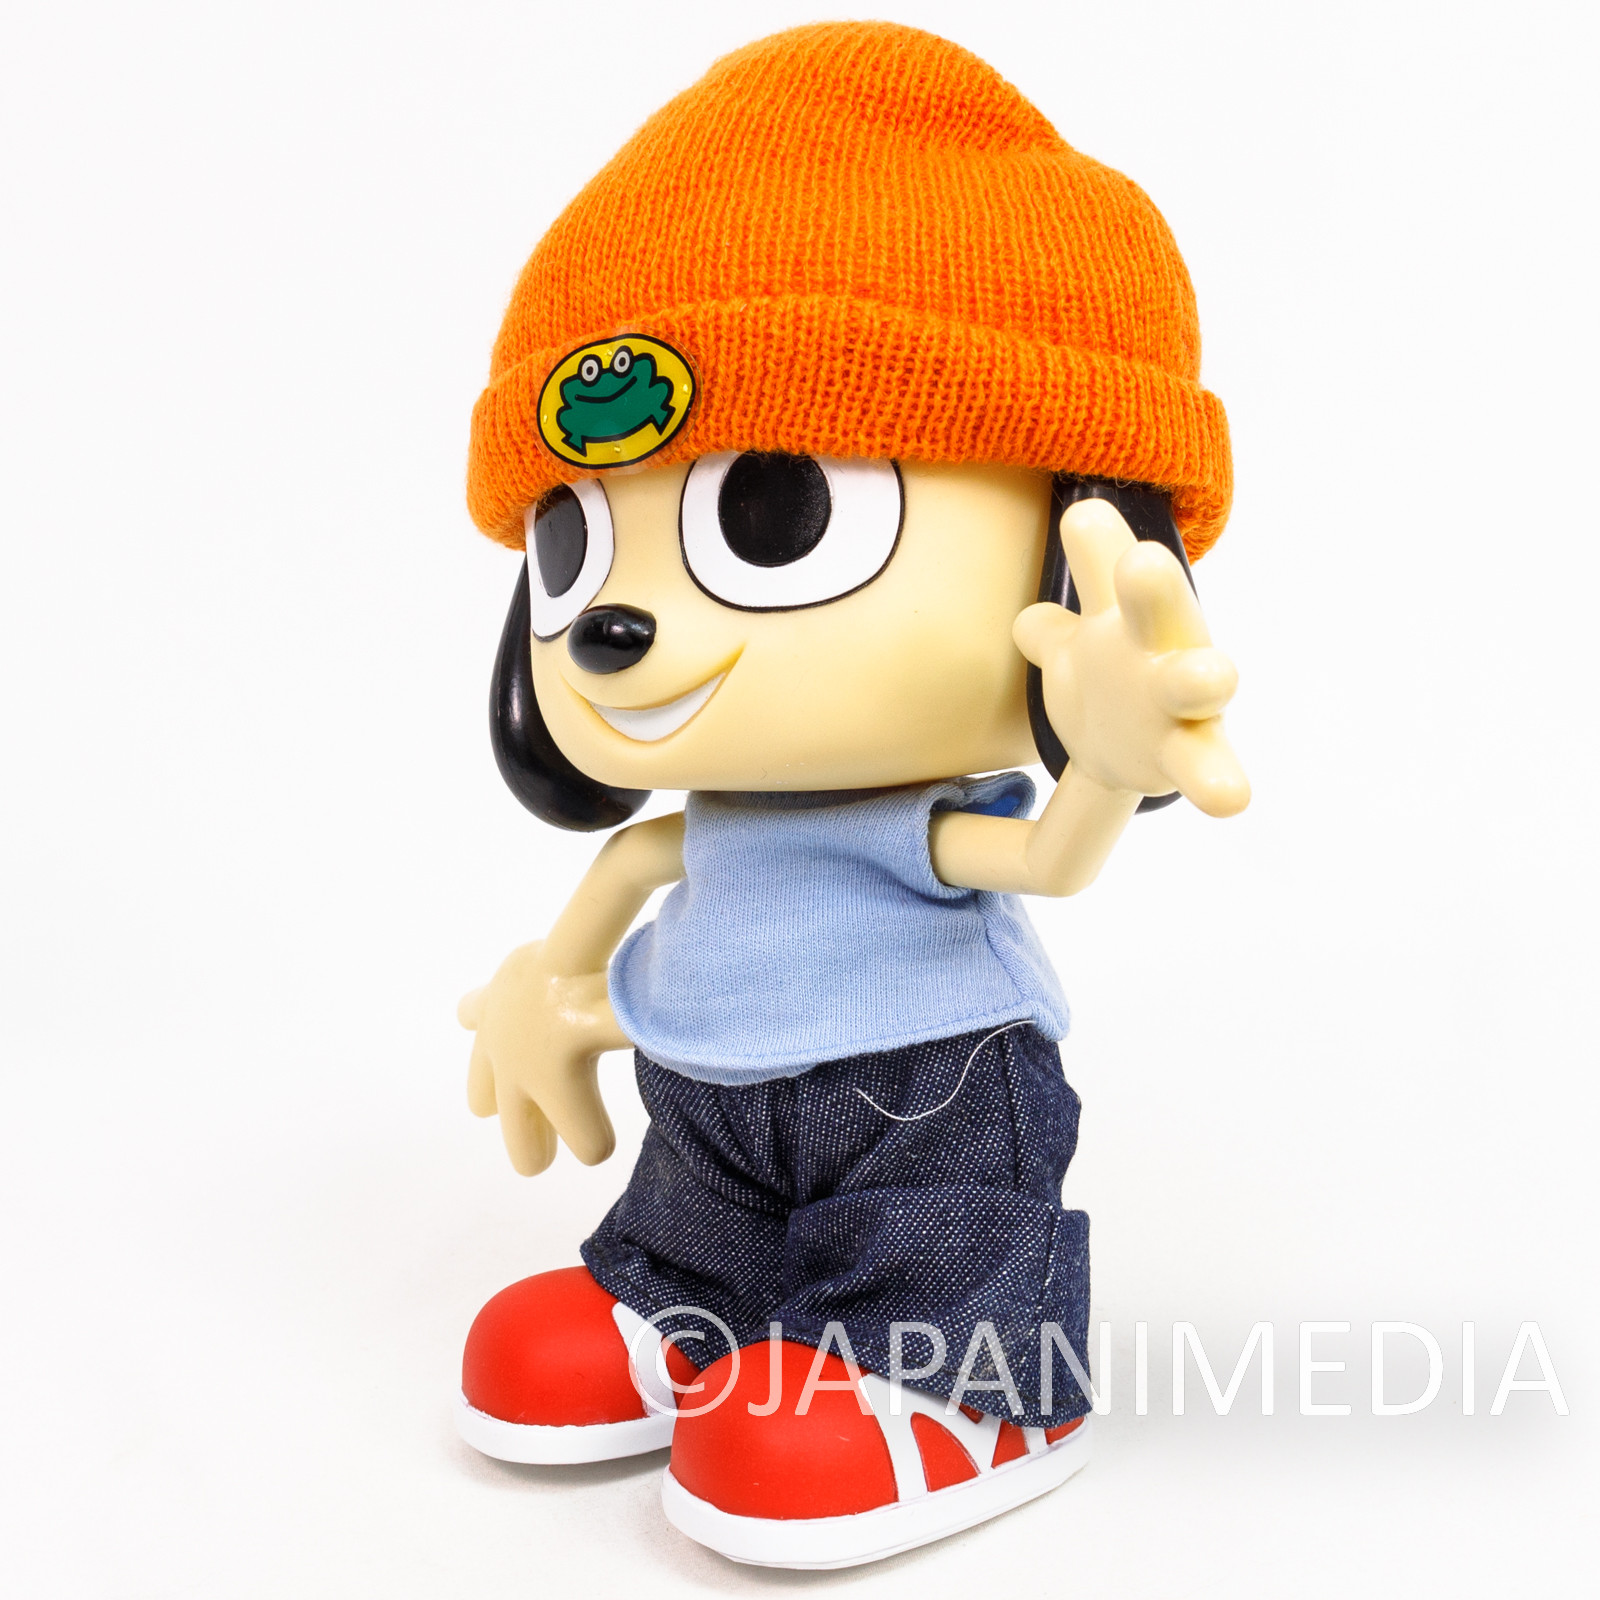 Buy Parappa The Rapper Totaku Figure Online at Low Prices in India 